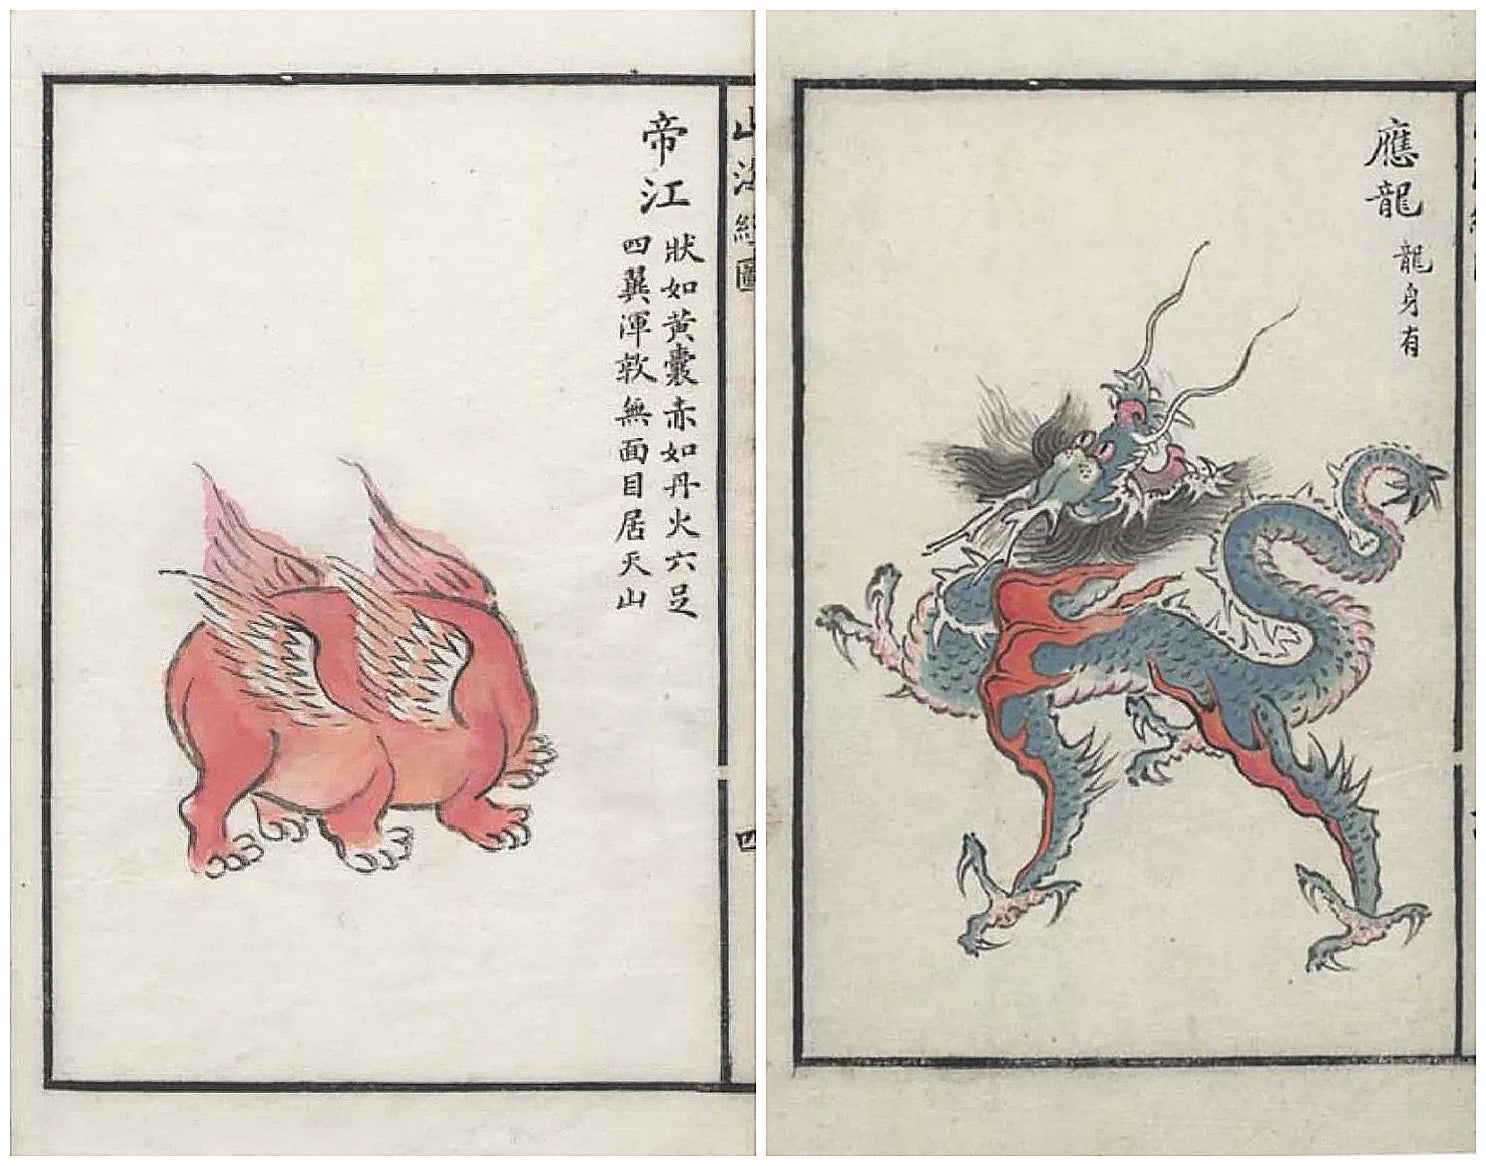 Two of the legendary creatures in Shan Hai Jing , a compilation of mythic geography and beasts